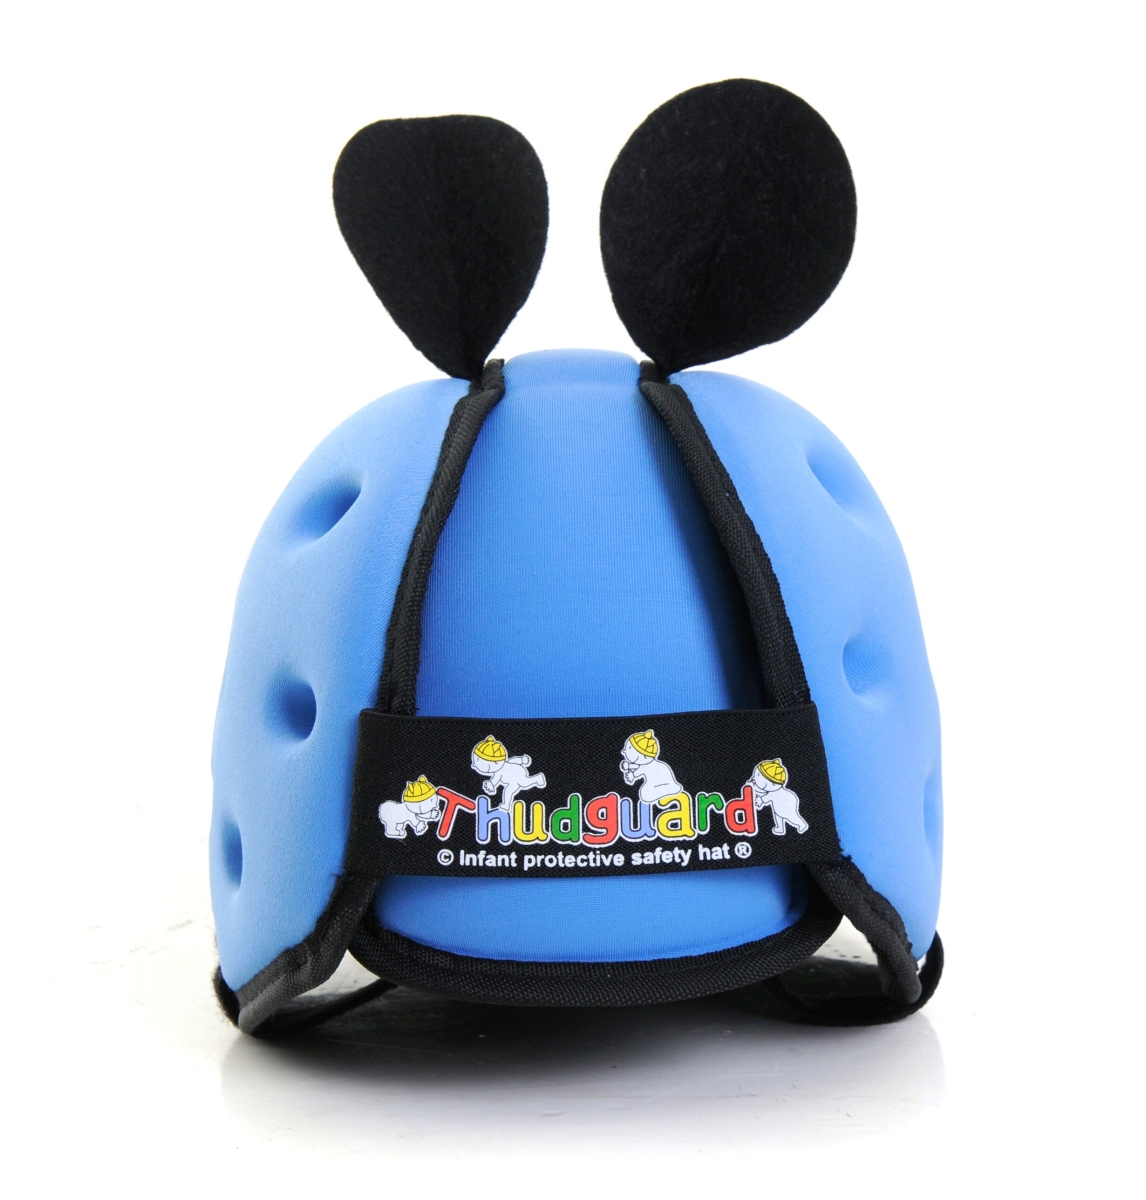 Thu001 Infant & Toddler Protective Safety Hat, Blue